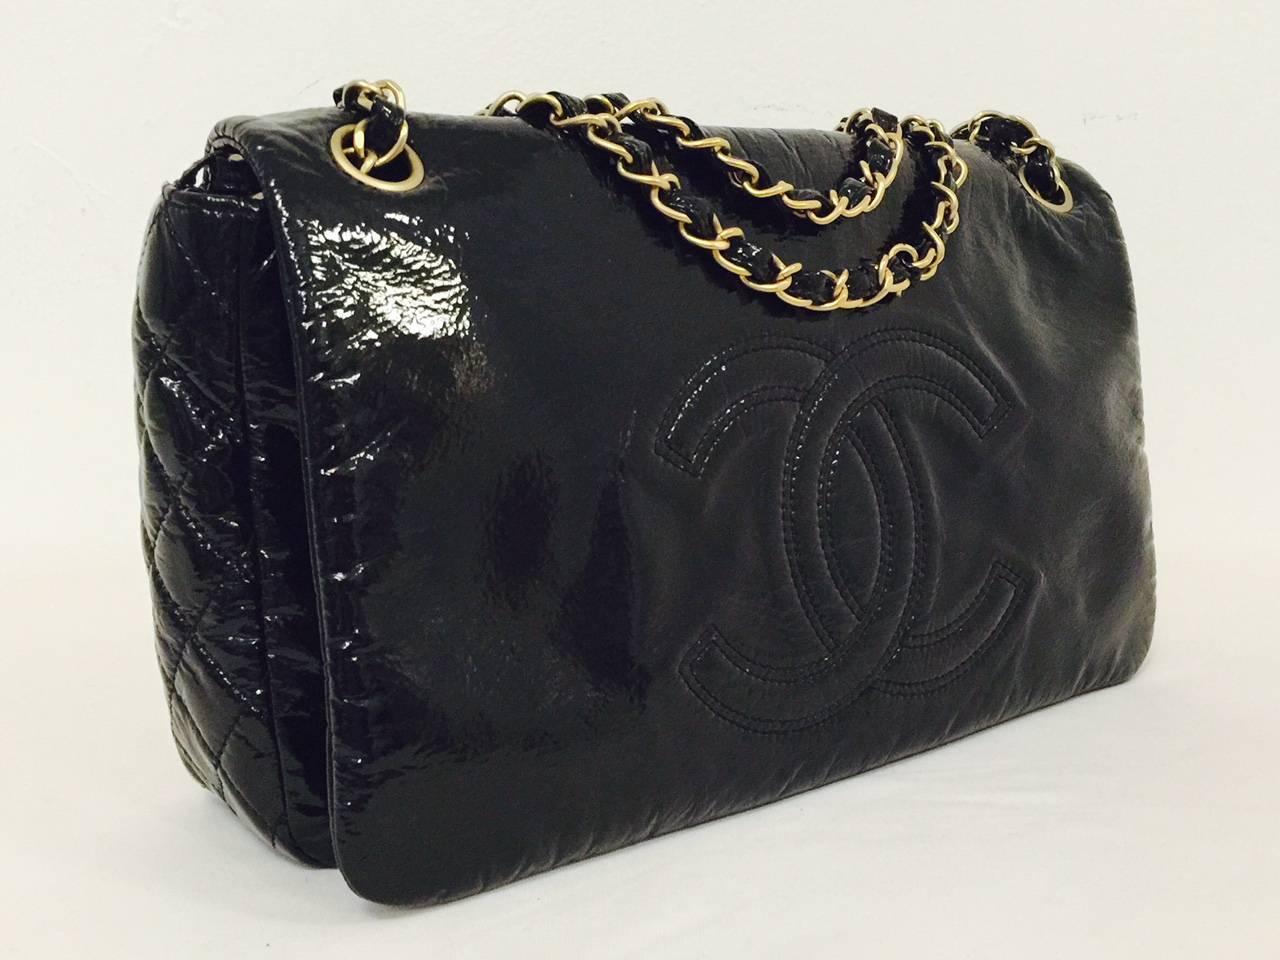 Black Patent Leather Flap Bag is a must for all devotees of the Great Coco Chanel!  Crafted from ultra-soft black patent leather, shoulder bag features the world renowned double 